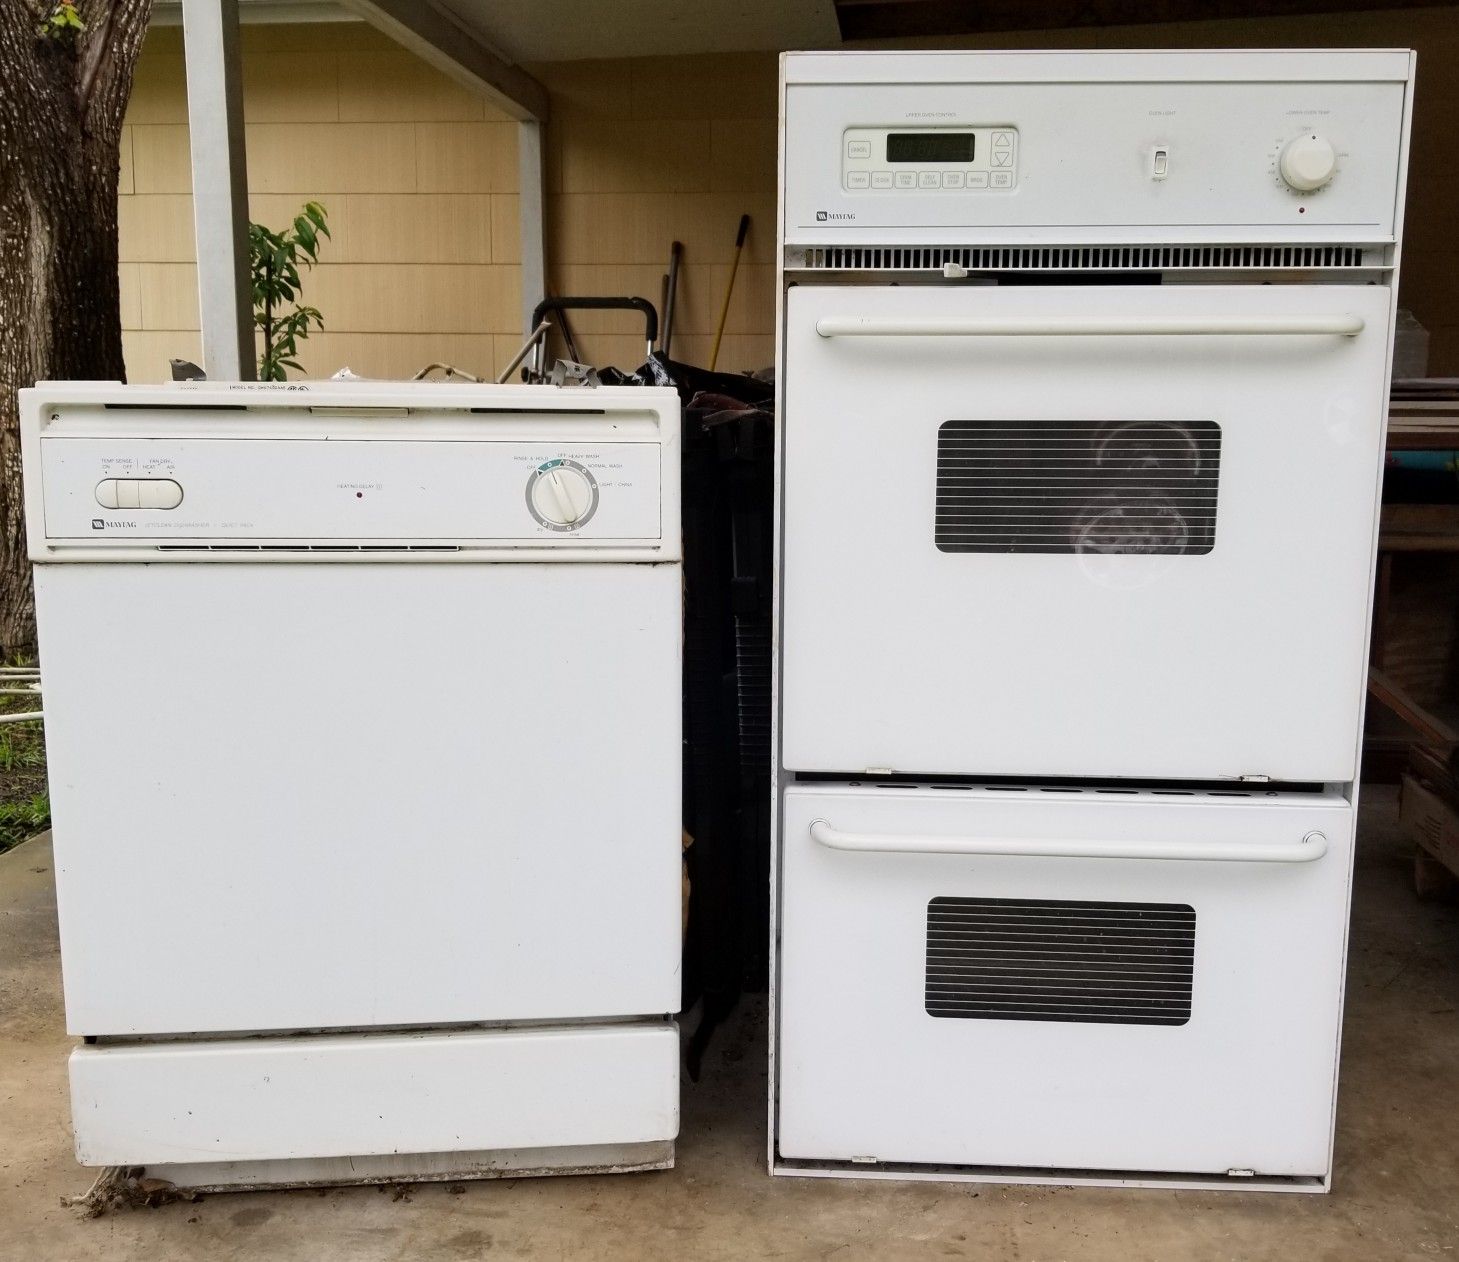 Or best offer. Maytag double oven and dishwasher